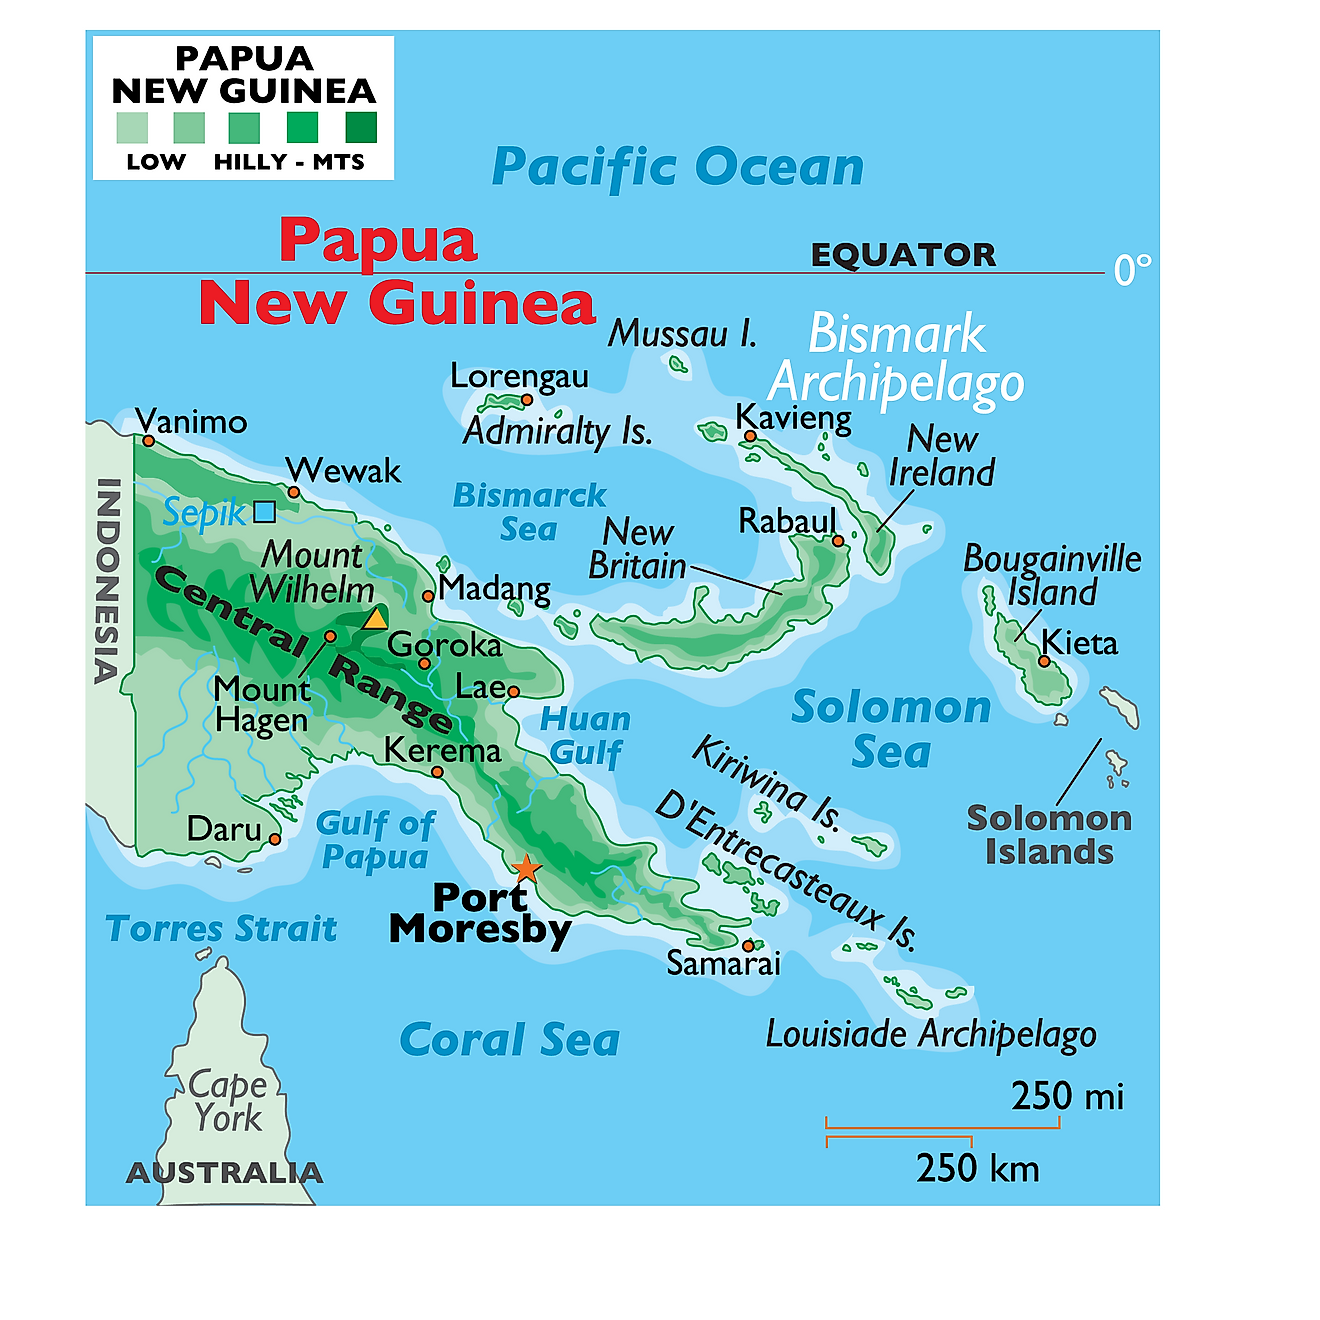 Grade 10 Examination Papers Png Papua New Guinea Education News - www ...